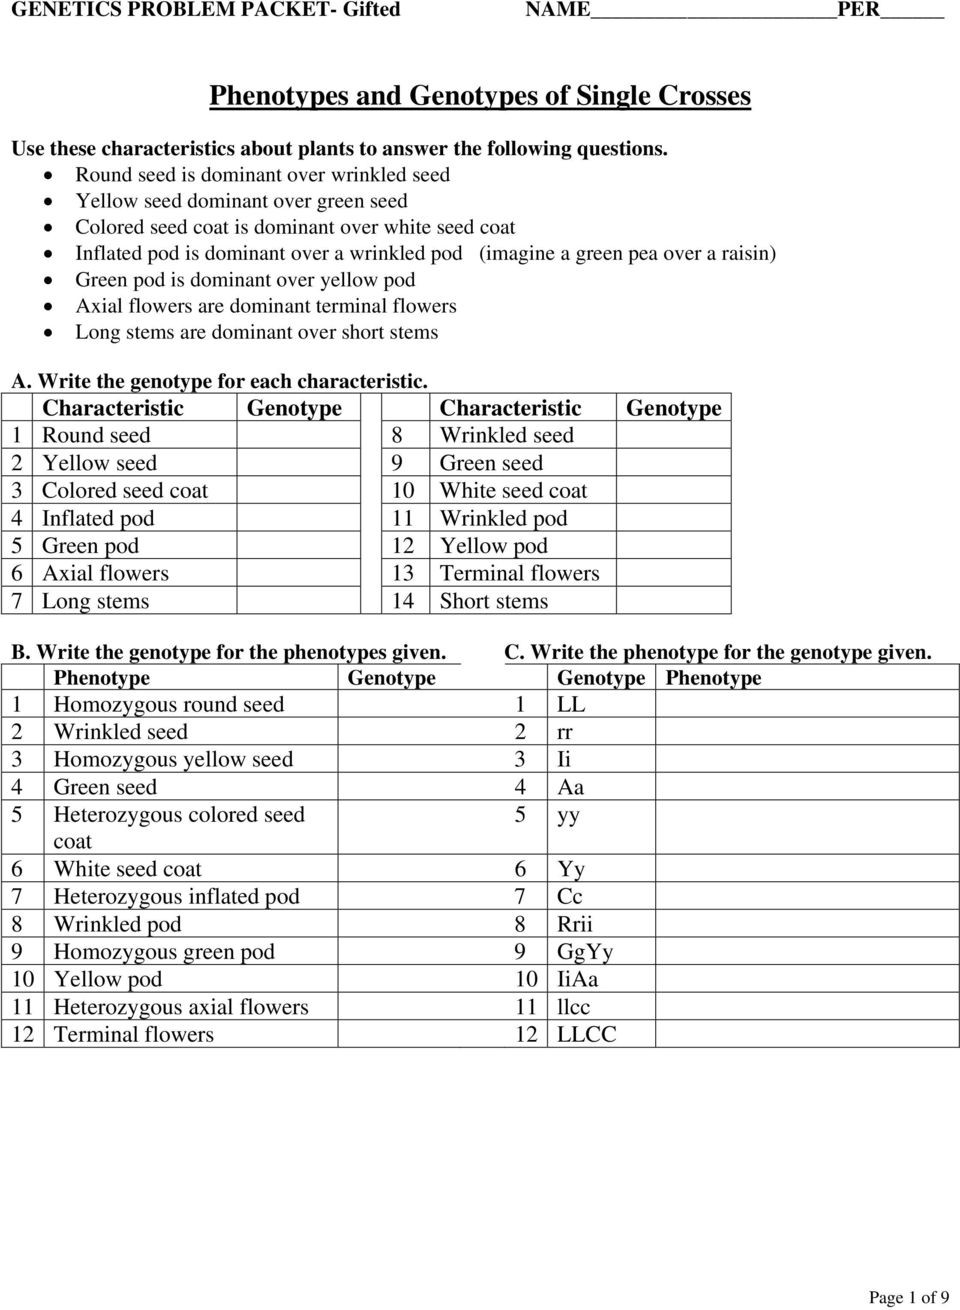 Genotypes and Phenotypes Worksheet Answers Phenotypes and Genotypes Of Single Crosses Pdf Free Download